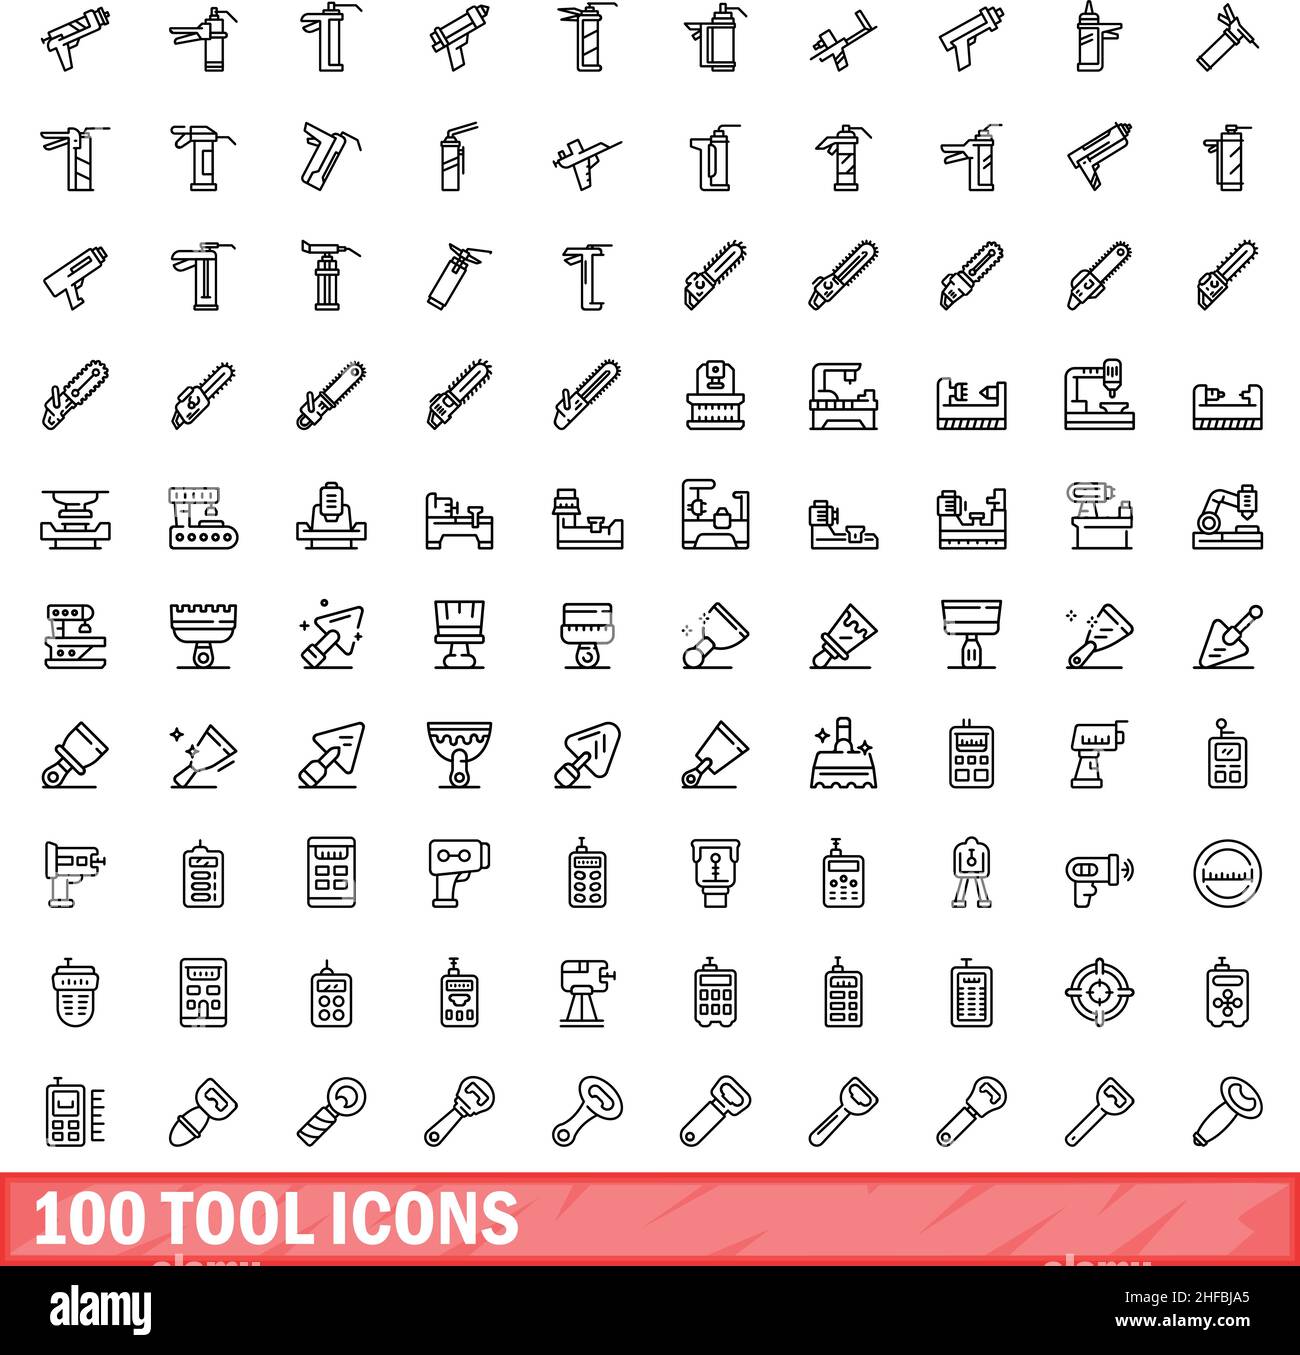 100 tool icons set. Outline illustration of 100 tool icons vector set isolated on white background Stock Vector